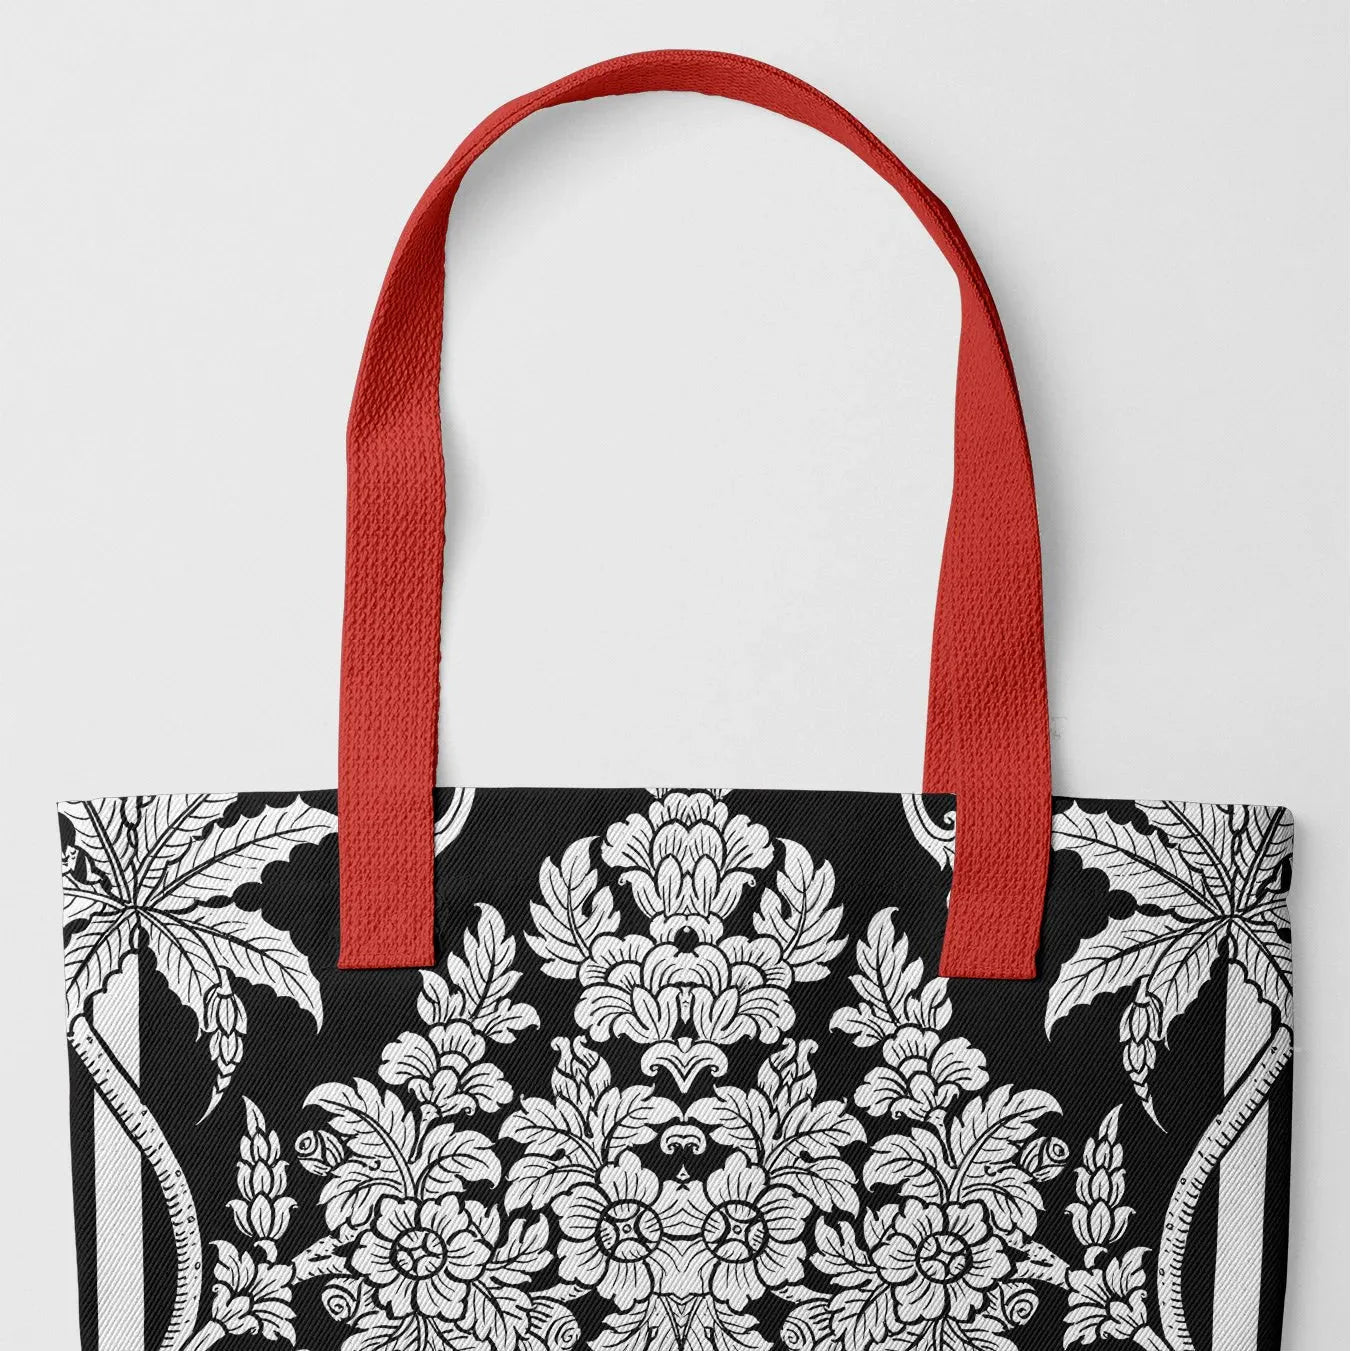 Midnight Oasis Tote Bag-black And White - Heavy Duty Reusable Grocery Bag - Red Handles - Shopping Totes - Aesthetic Art